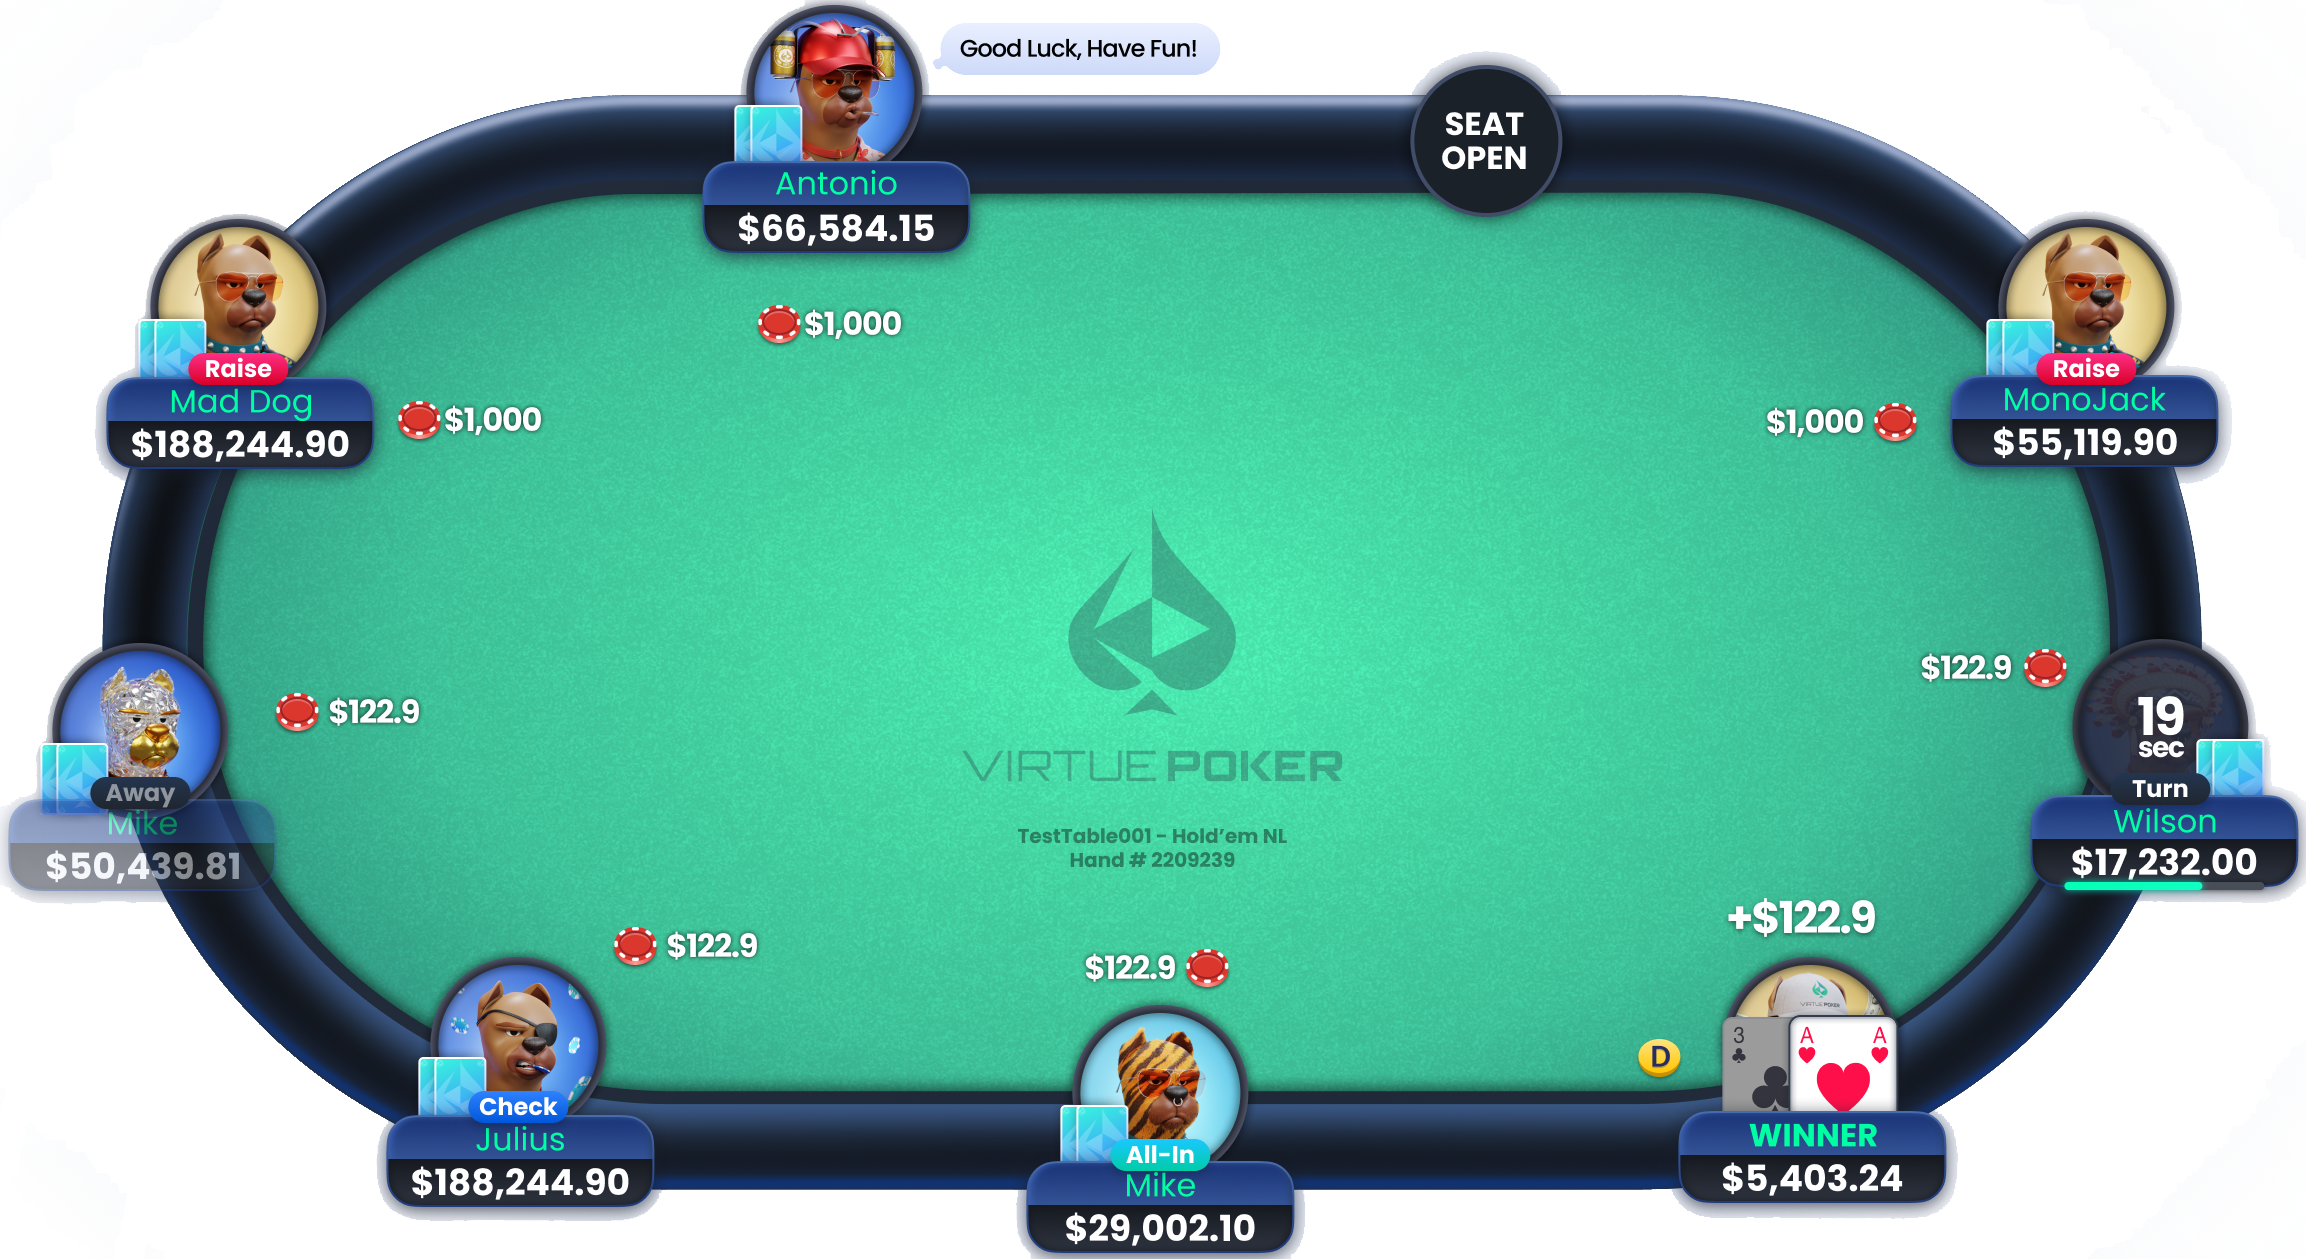 Poker with Friends - Online Game - Play for Free